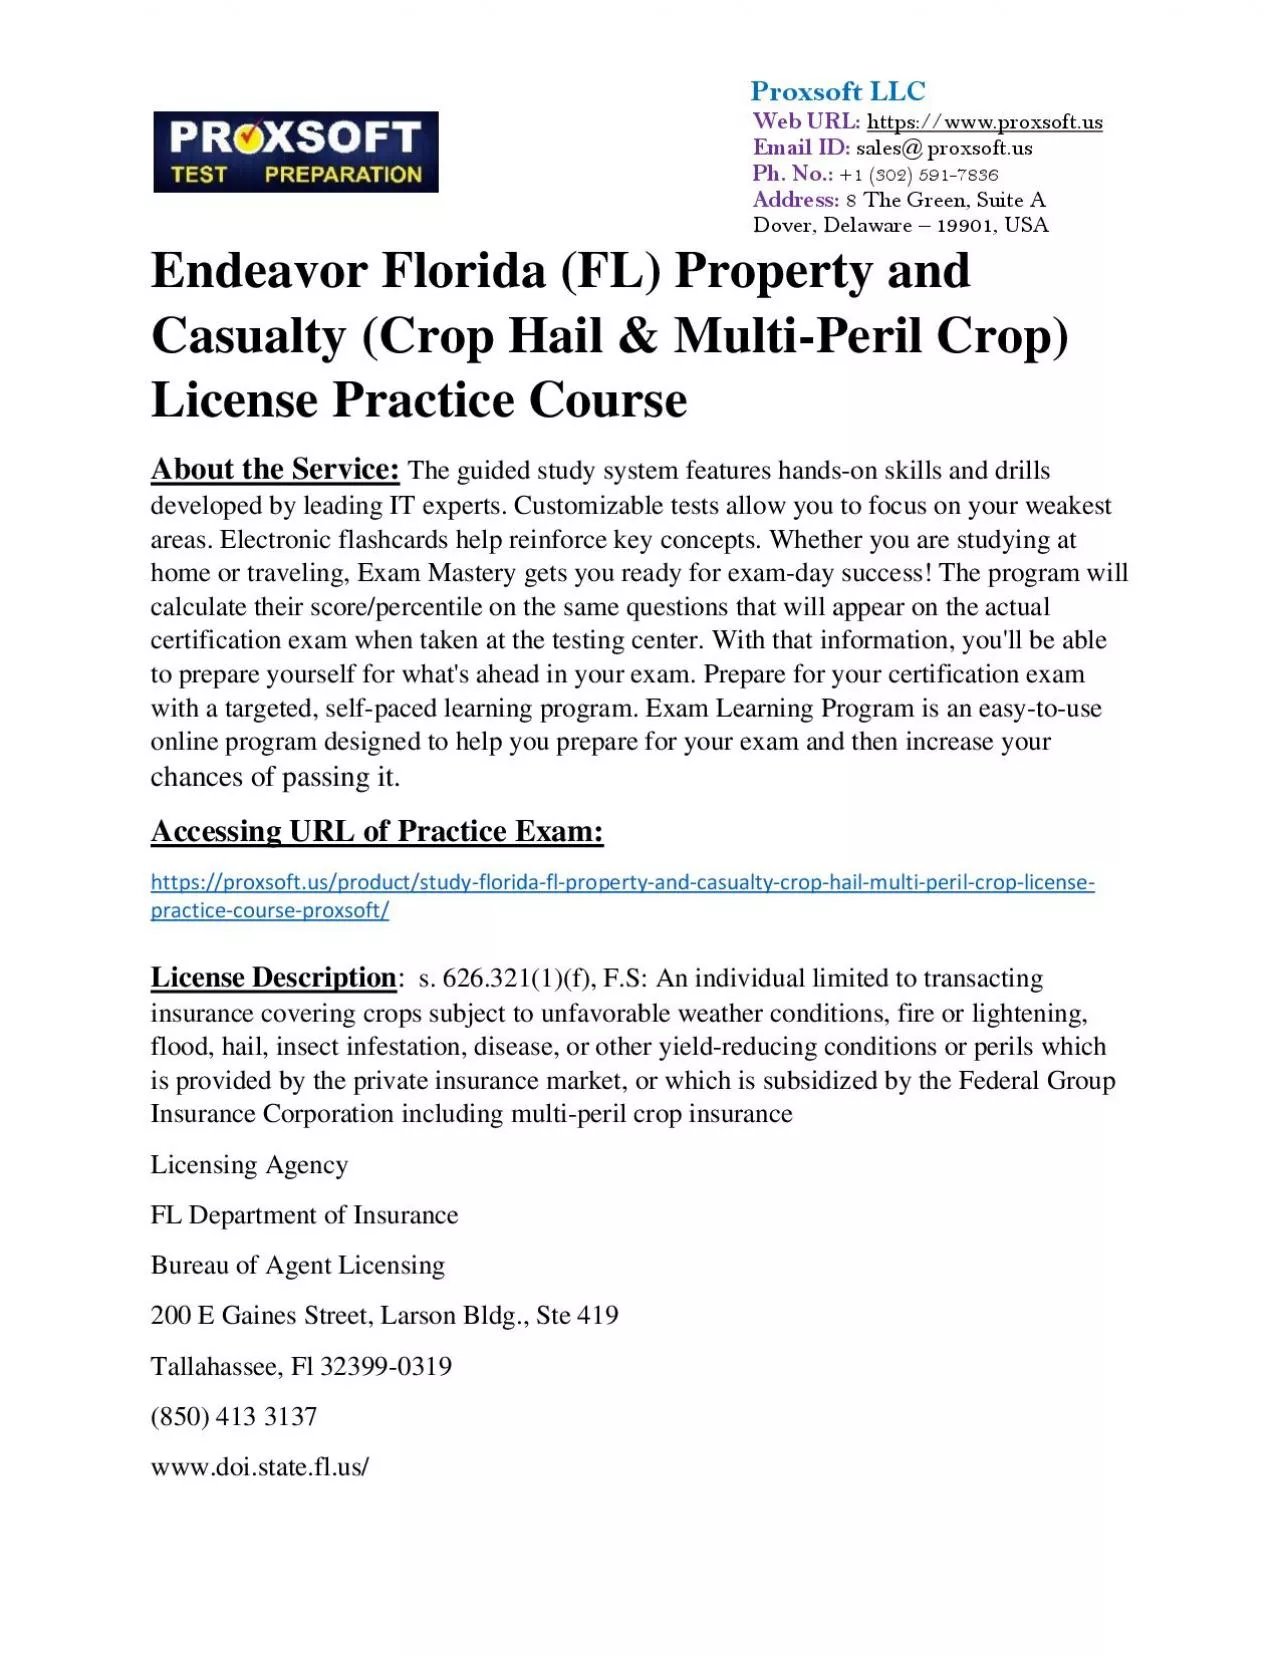 Endeavor Florida (FL) Property and Casualty (Crop Hail & Multi-Peril Crop) License Practice